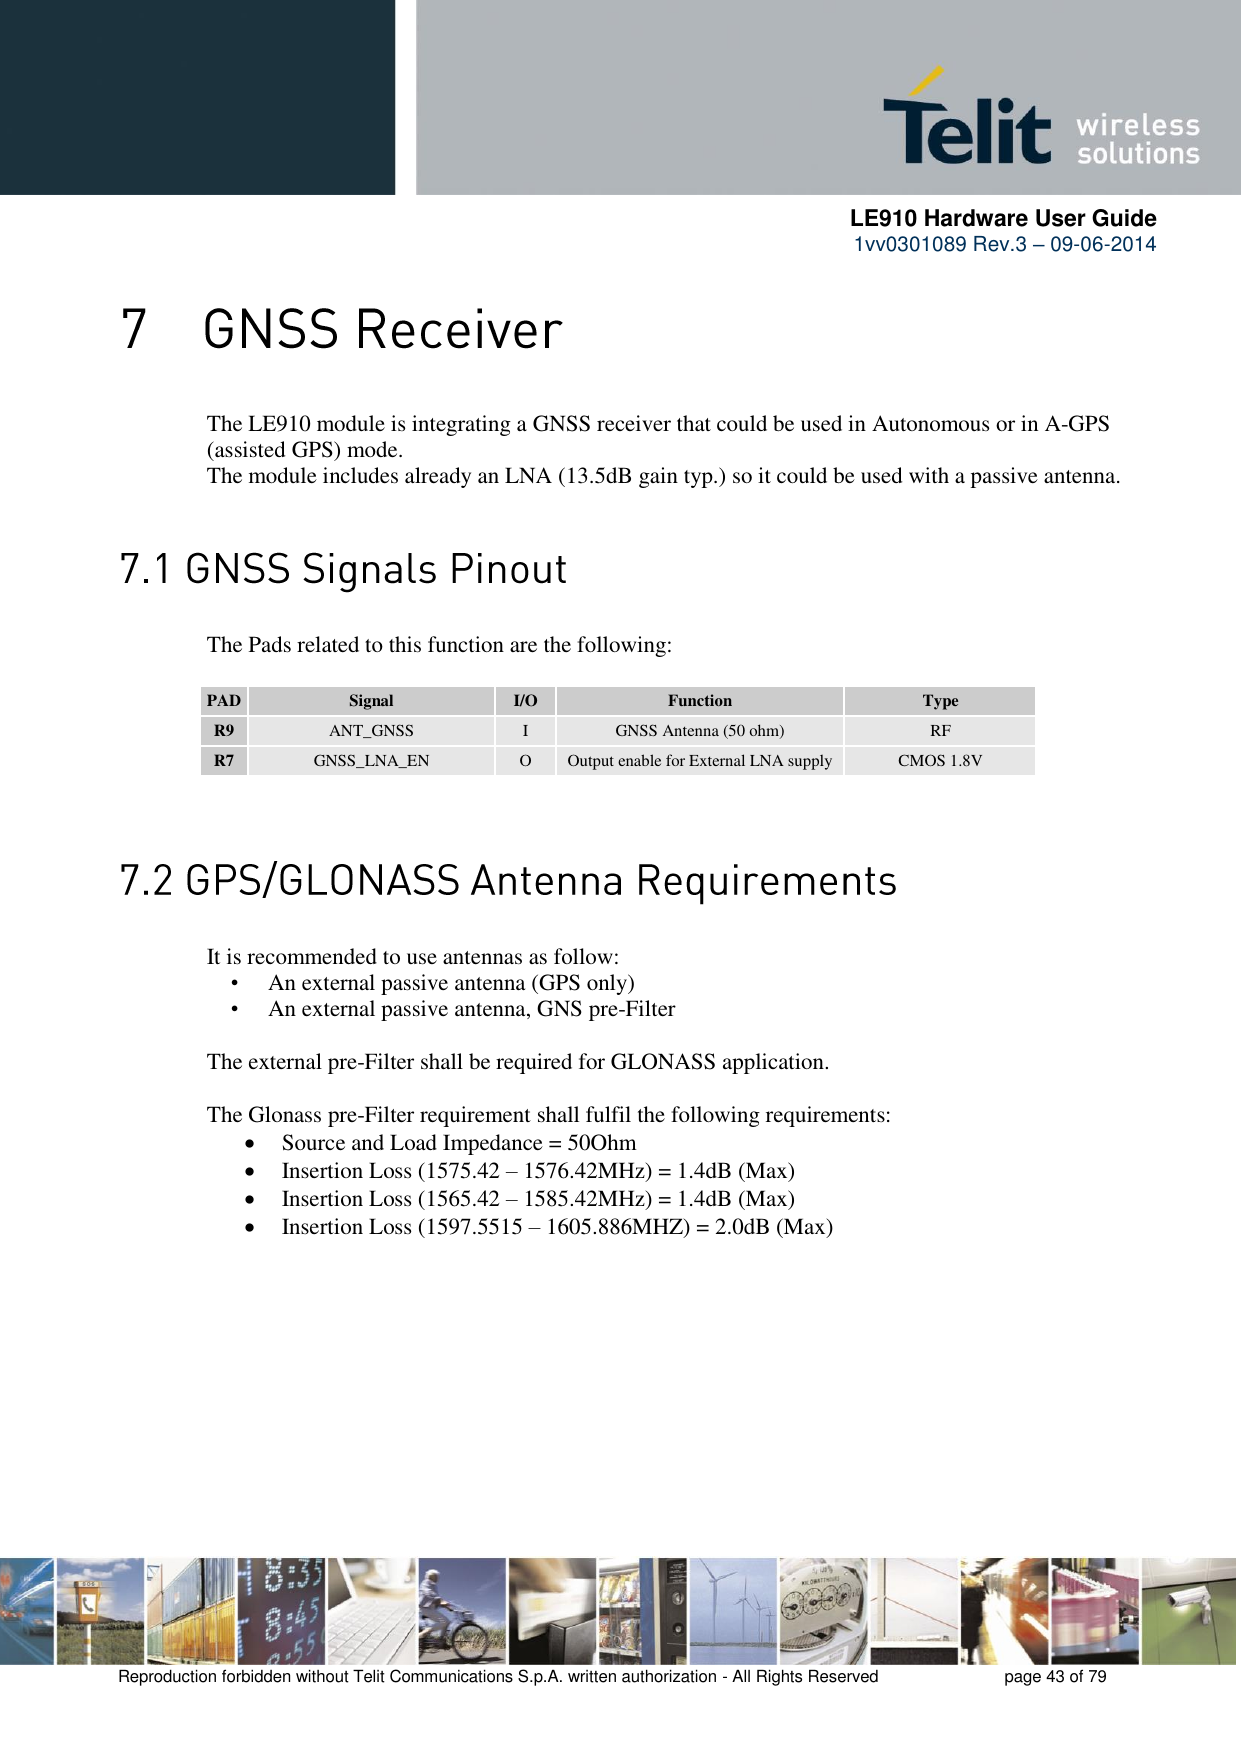      LE910 Hardware User Guide 1vv0301089 Rev.3 – 09-06-2014    Reproduction forbidden without Telit Communications S.p.A. written authorization - All Rights Reserved    page 43 of 79   The LE910 module is integrating a GNSS receiver that could be used in Autonomous or in A-GPS (assisted GPS) mode. The module includes already an LNA (13.5dB gain typ.) so it could be used with a passive antenna.   The Pads related to this function are the following:  PAD Signal I/O Function Type R9 ANT_GNSS I GNSS Antenna (50 ohm) RF R7 GNSS_LNA_EN O Output enable for External LNA supply CMOS 1.8V    It is recommended to use antennas as follow:  • An external passive antenna (GPS only)  • An external passive antenna, GNS pre-Filter   The external pre-Filter shall be required for GLONASS application.   The Glonass pre-Filter requirement shall fulfil the following requirements:  Source and Load Impedance = 50Ohm   Insertion Loss (1575.42 – 1576.42MHz) = 1.4dB (Max)   Insertion Loss (1565.42 – 1585.42MHz) = 1.4dB (Max)   Insertion Loss (1597.5515 – 1605.886MHZ) = 2.0dB (Max)       